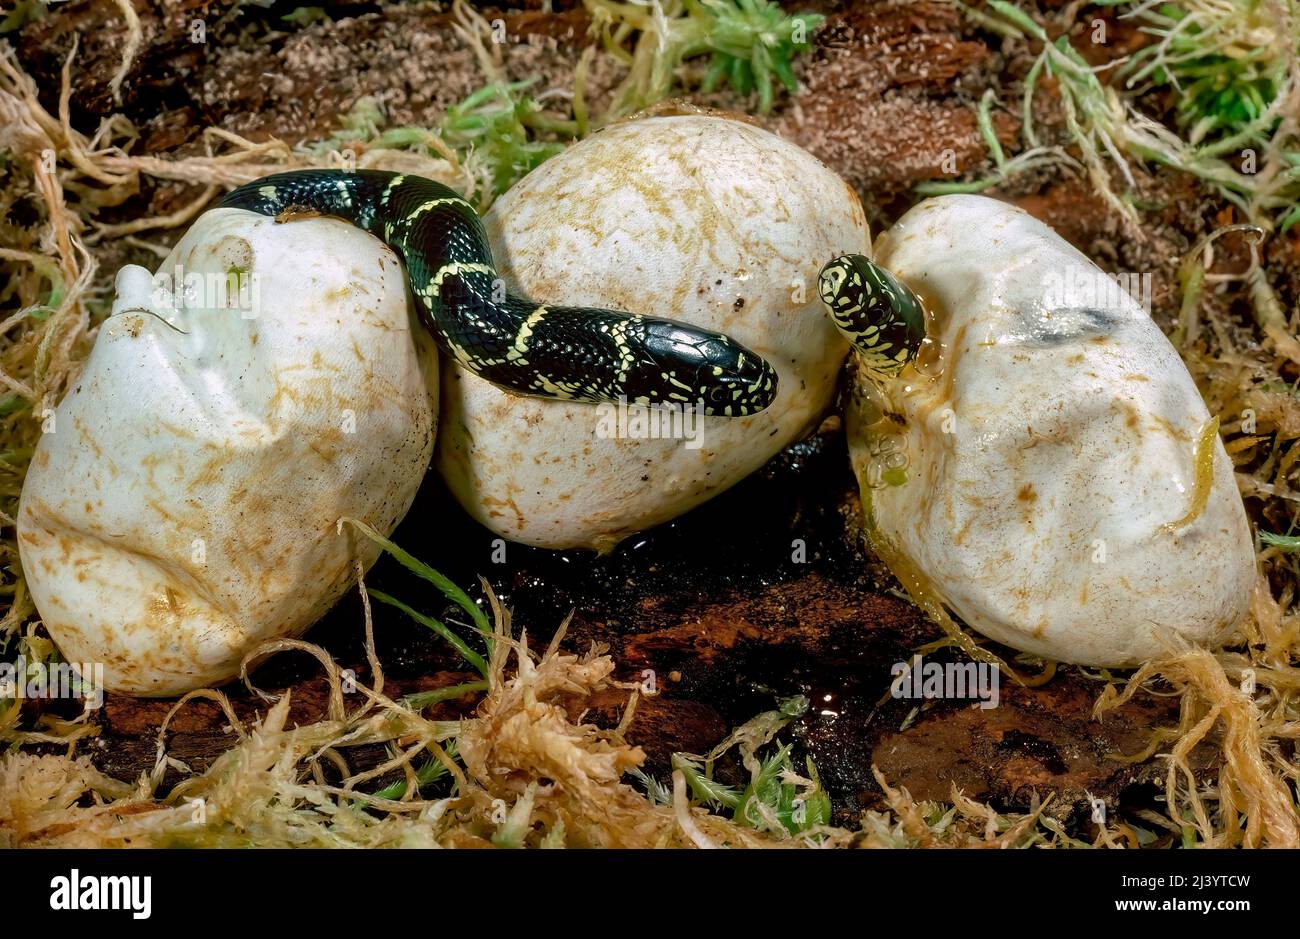 Eastern Kingsnakes (Lampropeltis getula), hatching from eggs Stock Photo